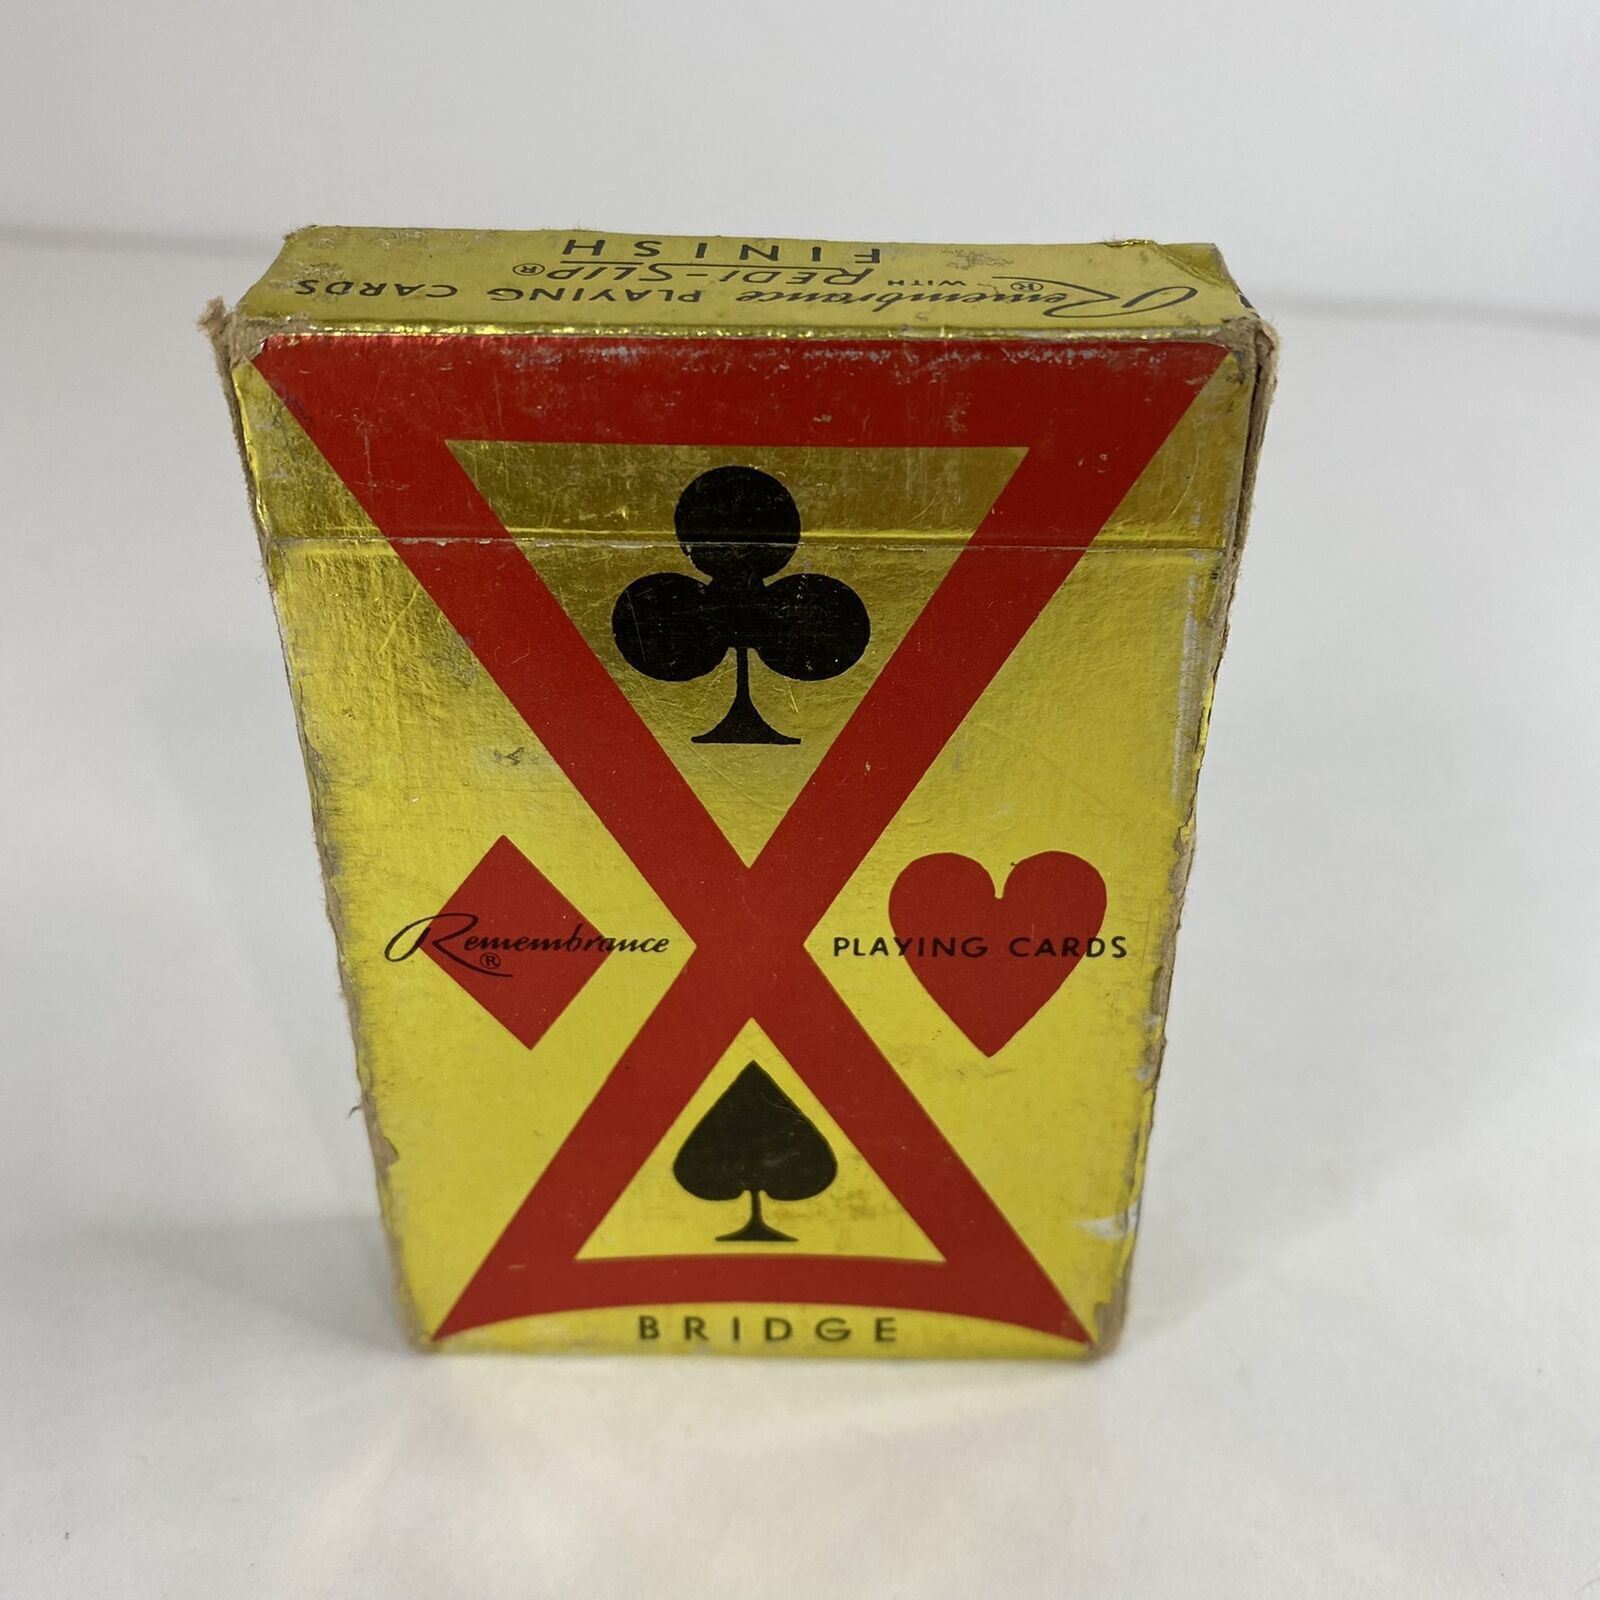 Vintage Remembrance Playing Cards with Redi-Slip Finish Bridge